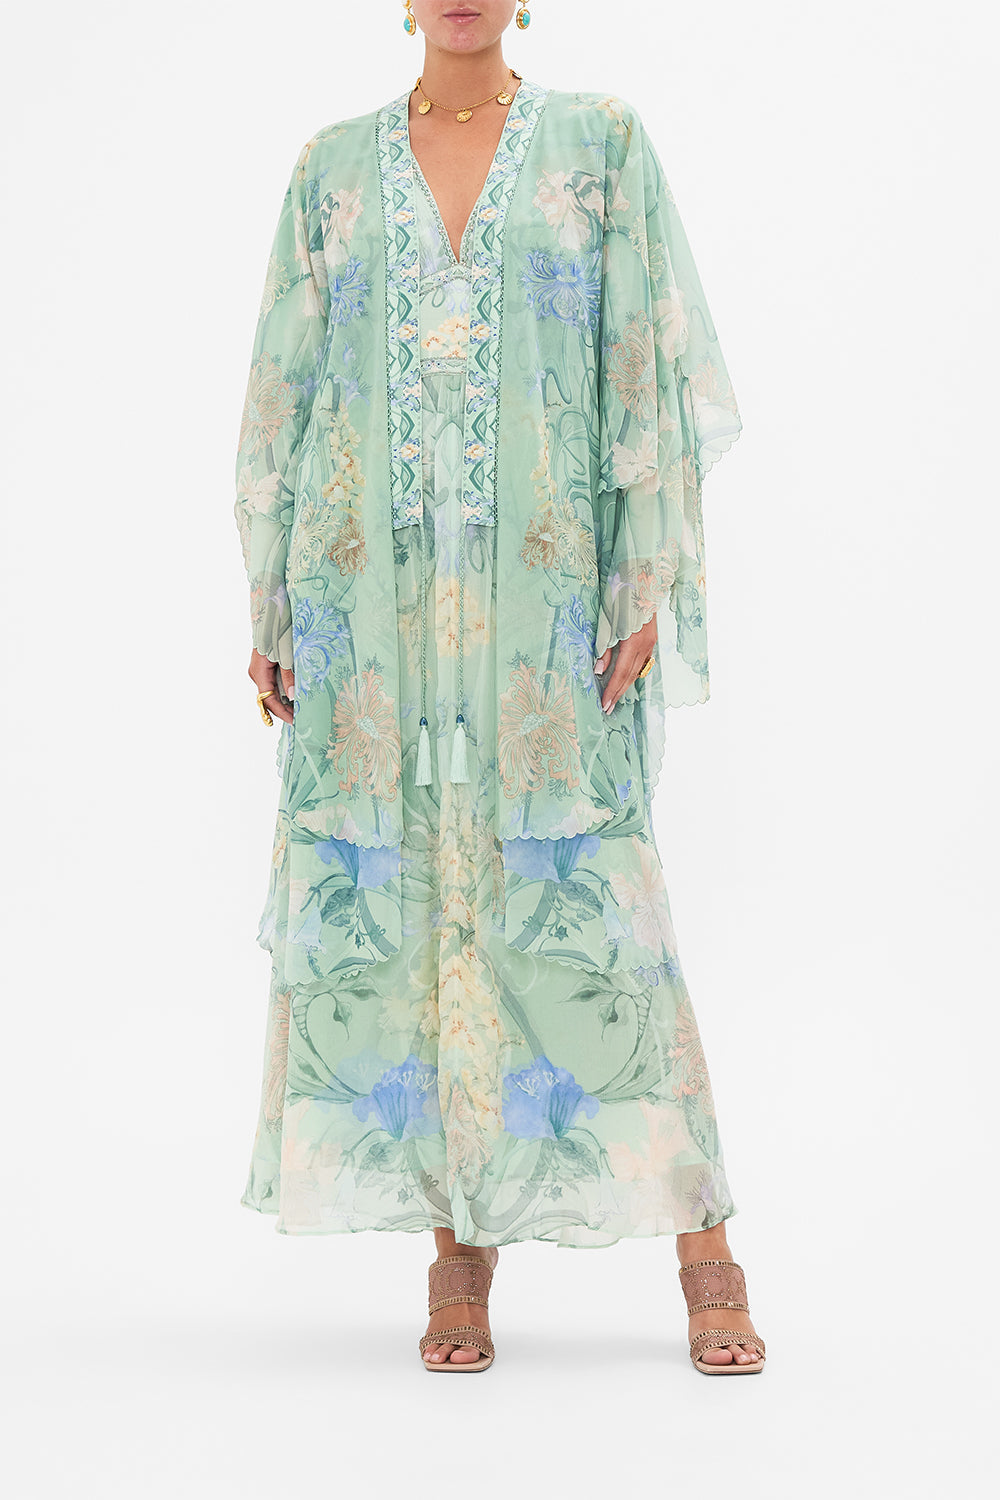 CAMILLA Floral Flared Sleeve Dress in Dreaming in Dutch